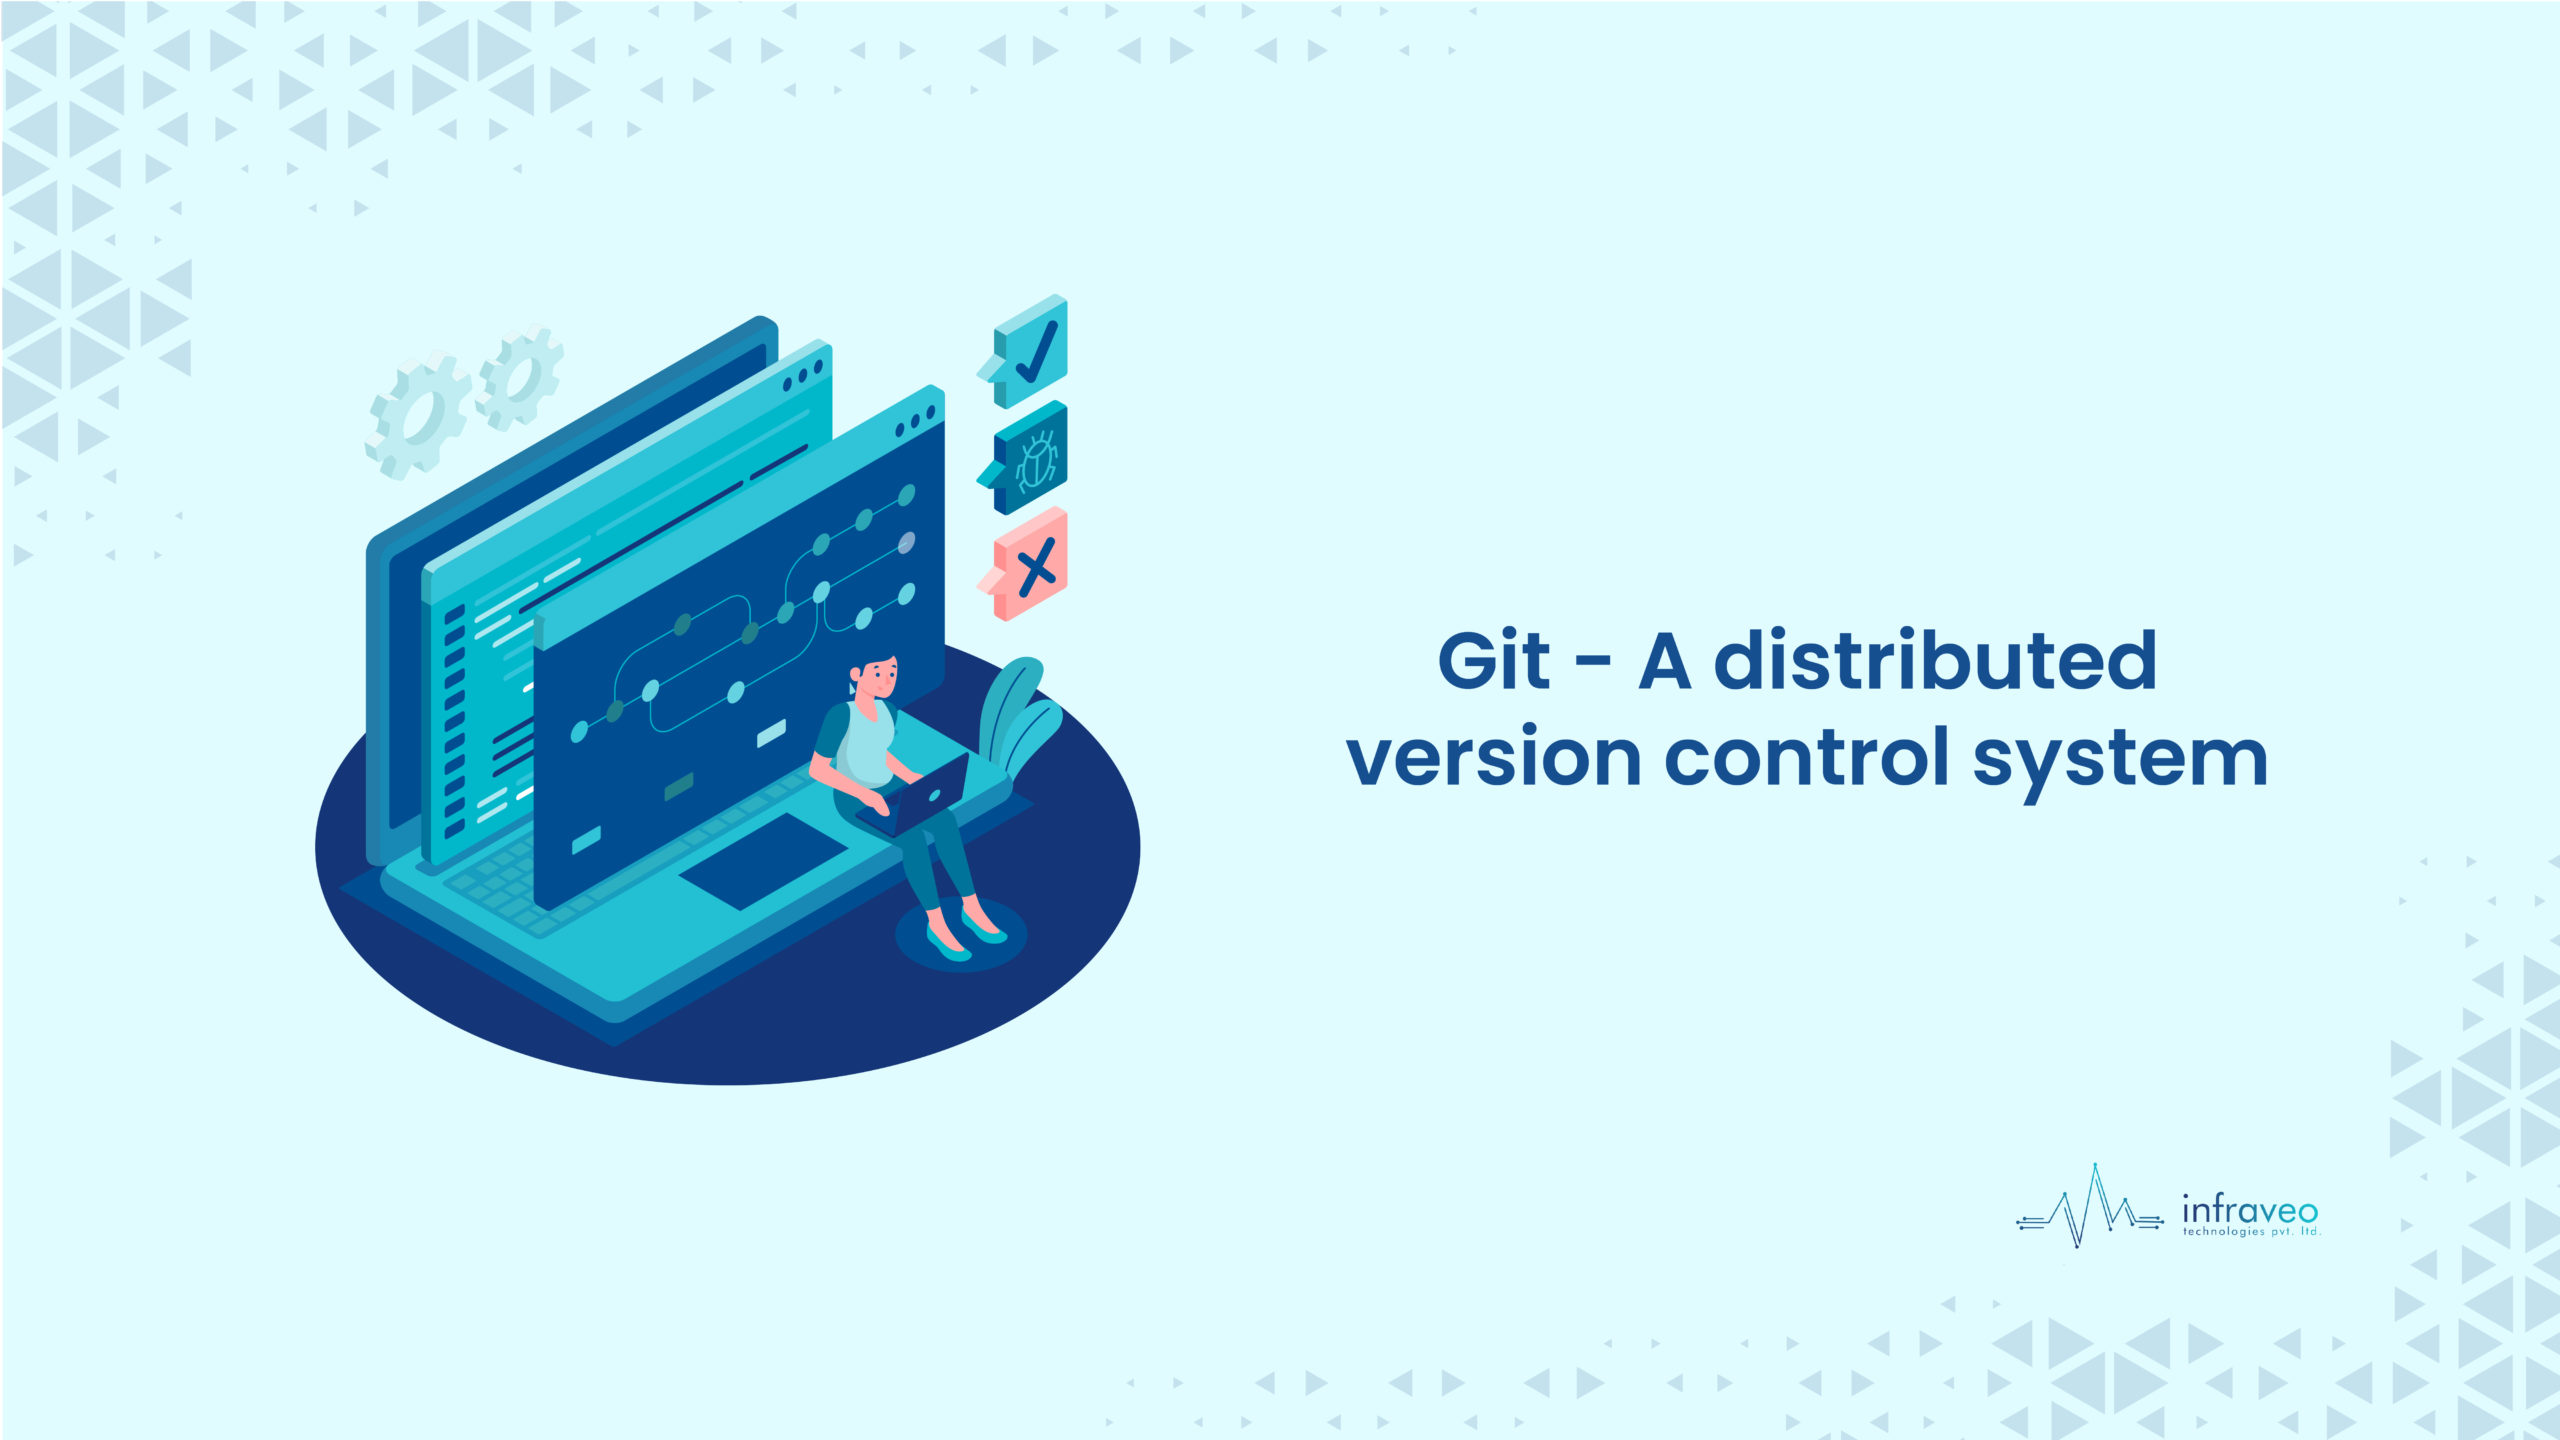 Git - a distributed version control system